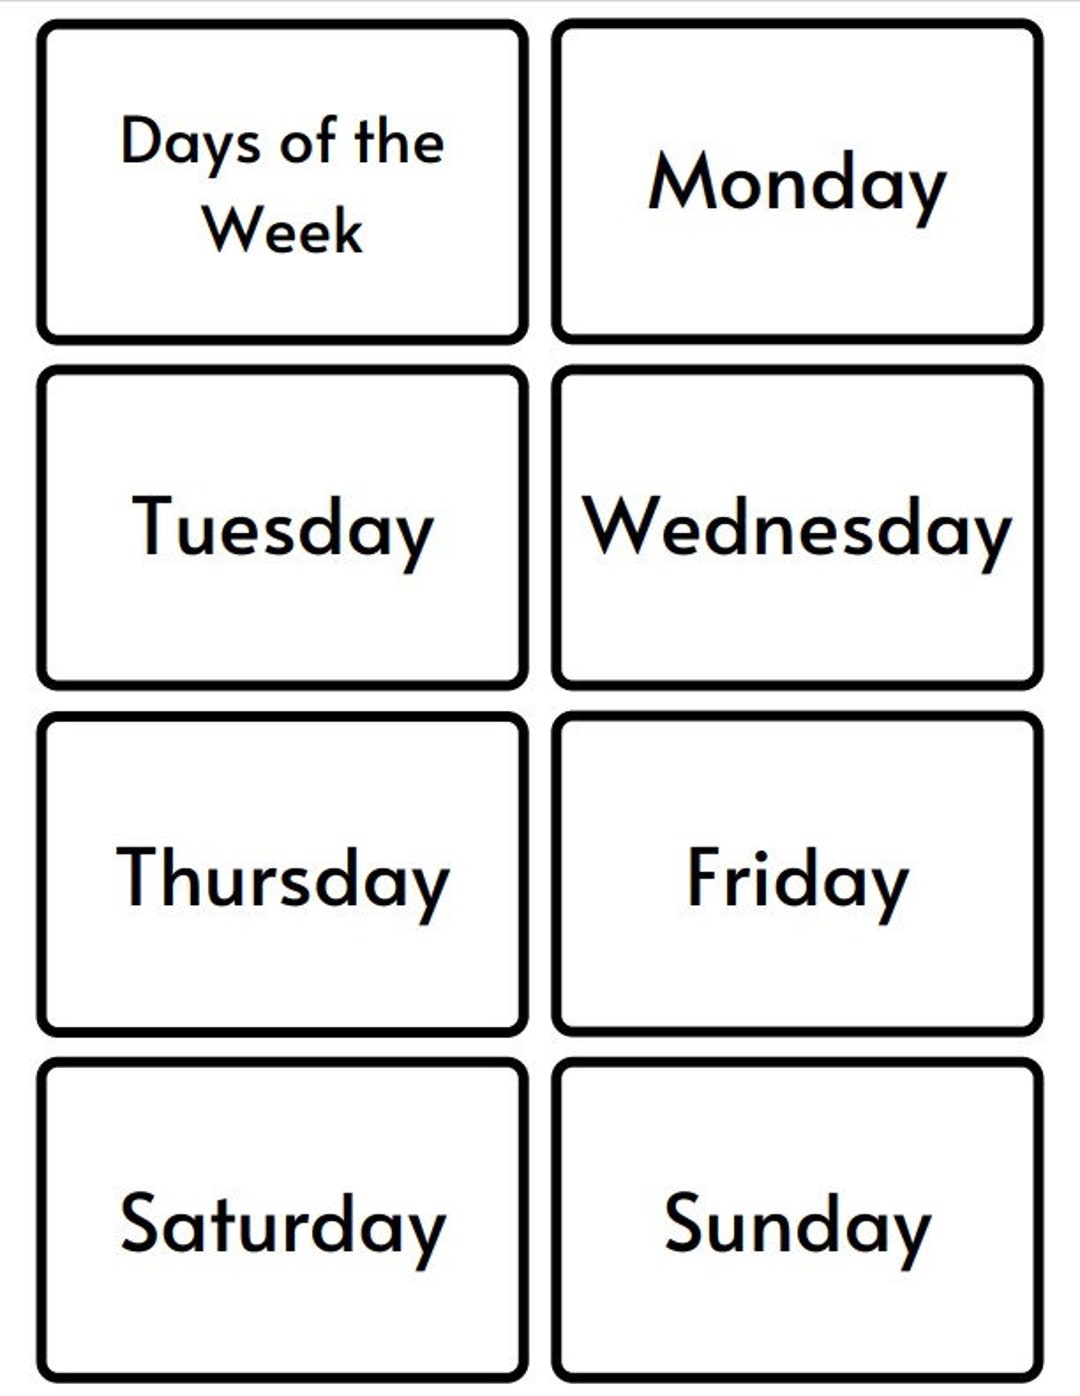 days-of-the-week-printable-flashcards-etsy